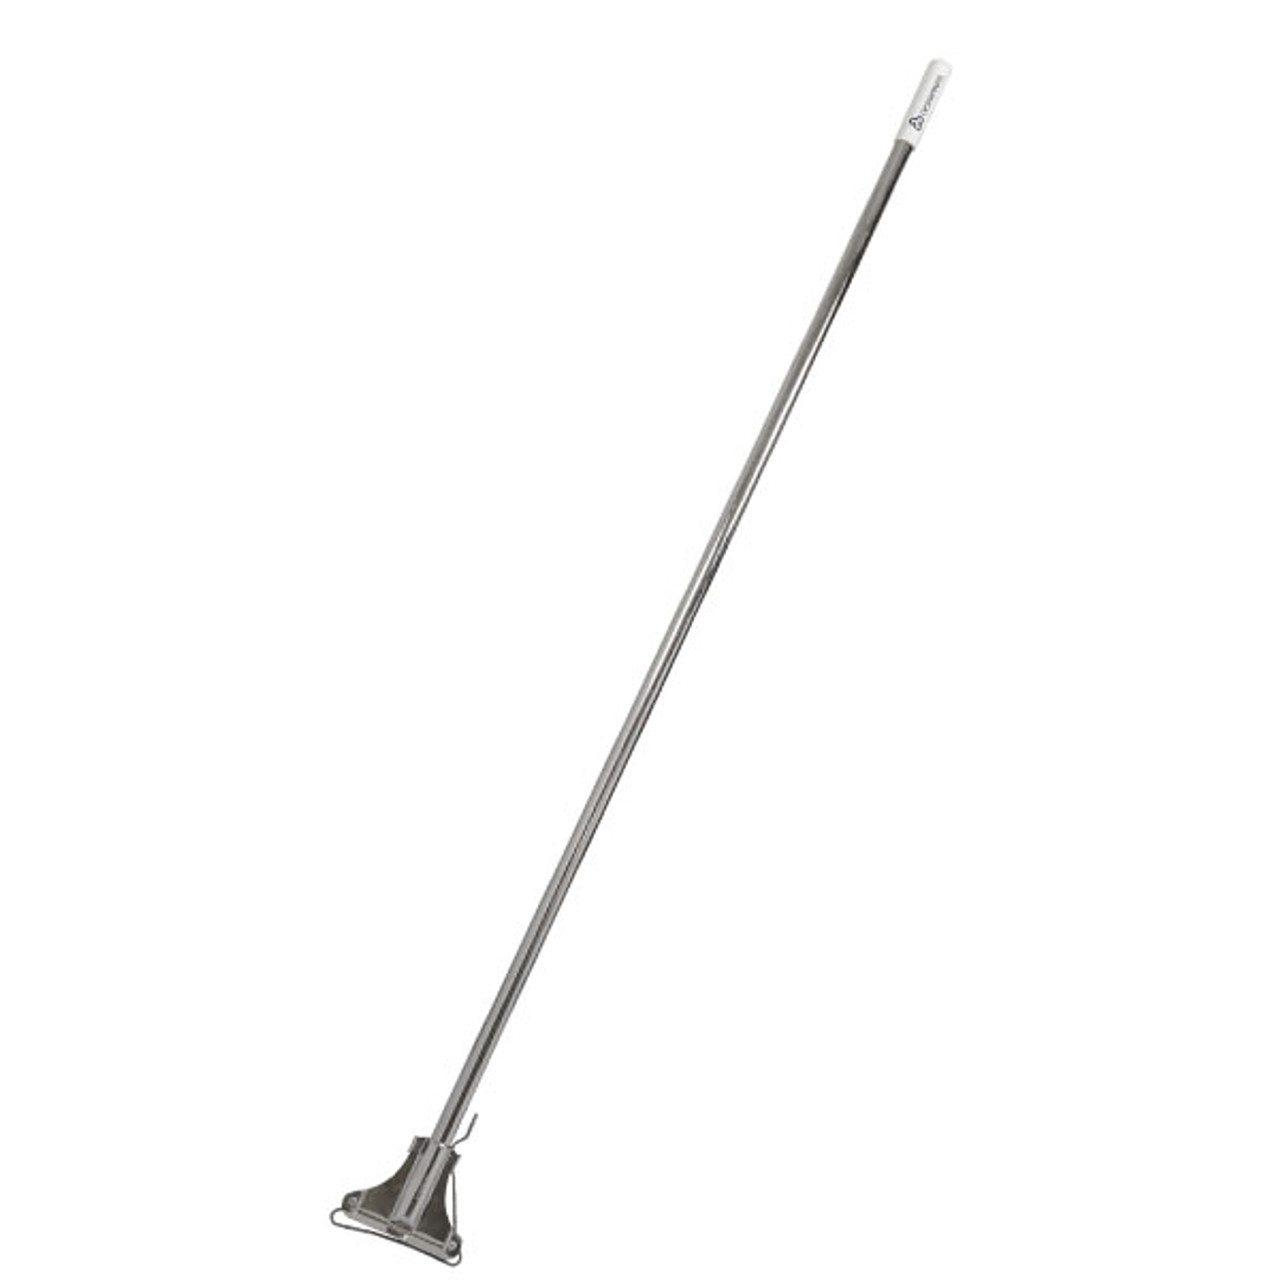 Handles; 304 Stainless Steel, Autoclavable, Two Pieces, 60"L, GR-2641 - Cleanroom World